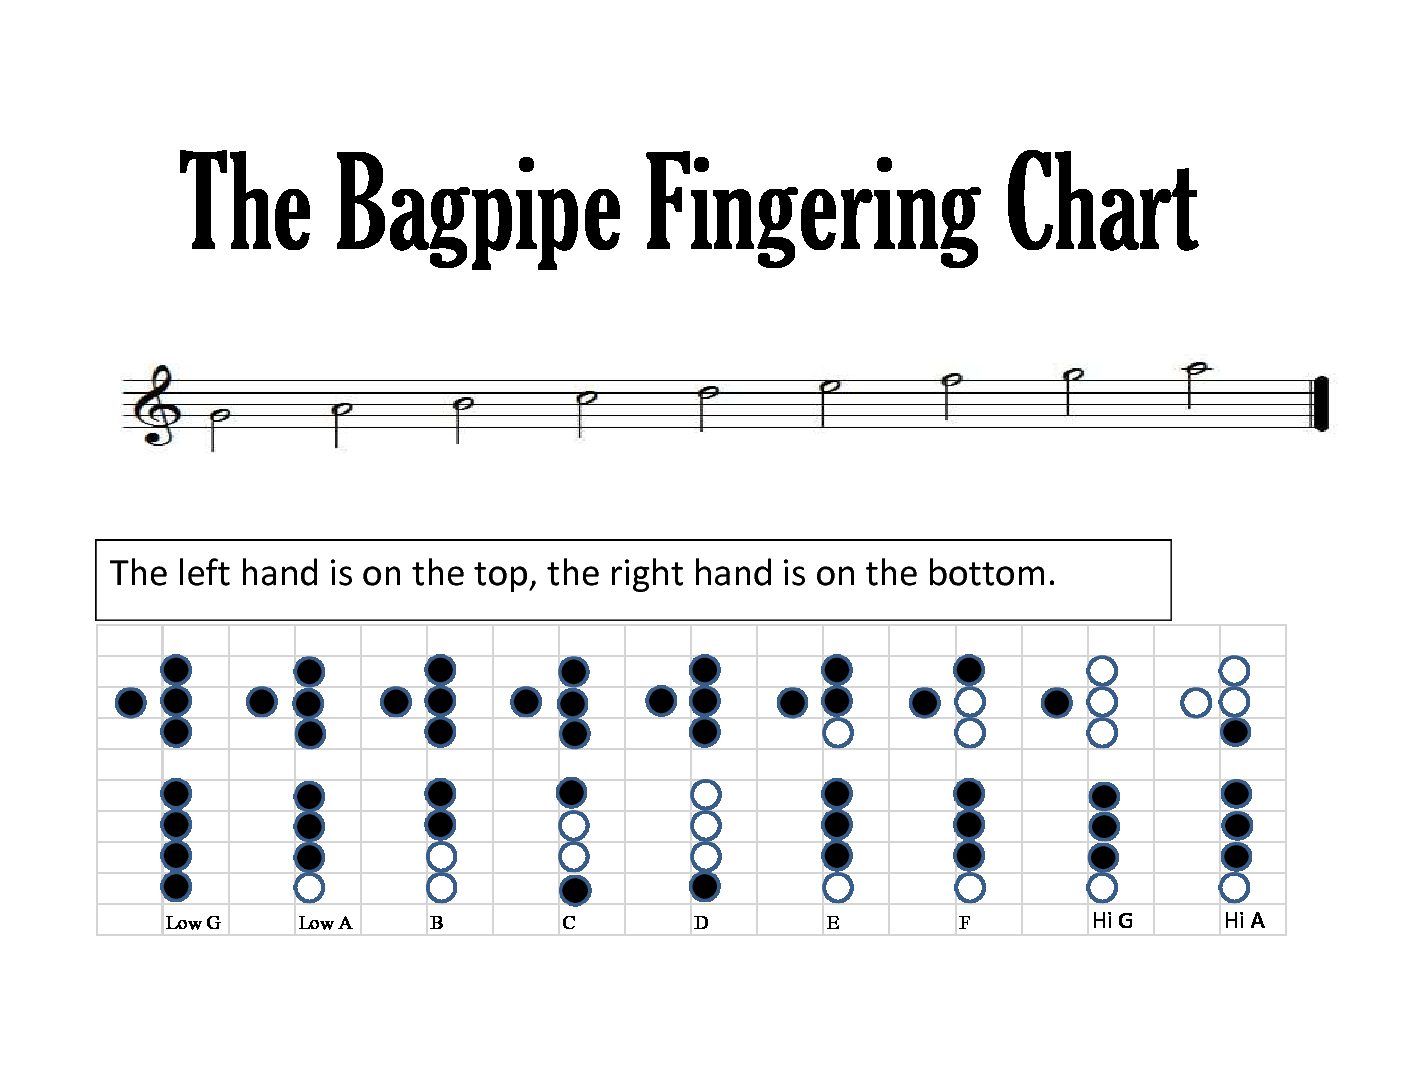 two-free-lessons-bagpipe-lessons